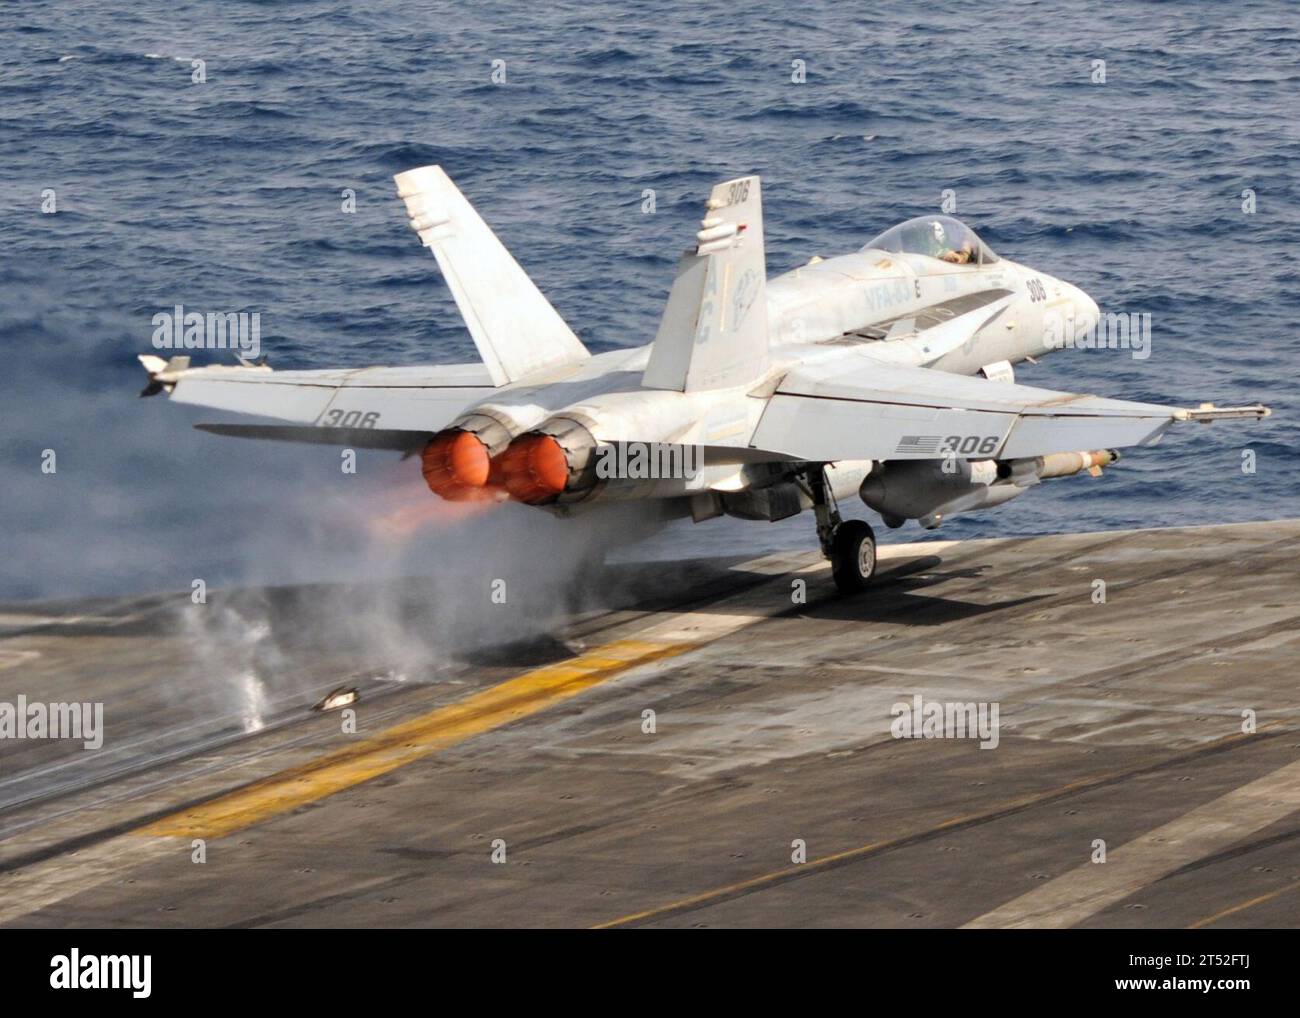 1006164236E-233 ARABIAN SEA (June 16, 2010) An F/A-18C Hornet assigned to the Rampagers of Strike Fighter Squadron (VFA) 83 catapults from the aircraft carrier USS Dwight D. Eisenhower (CVN 69). The Eisenhower Carrier Strike Group is deployed as part of an ongoing rotation of forward-deployed forces to support maritime security operations in the U.S. 5th Fleet area of responsibility. Navy Stock Photo